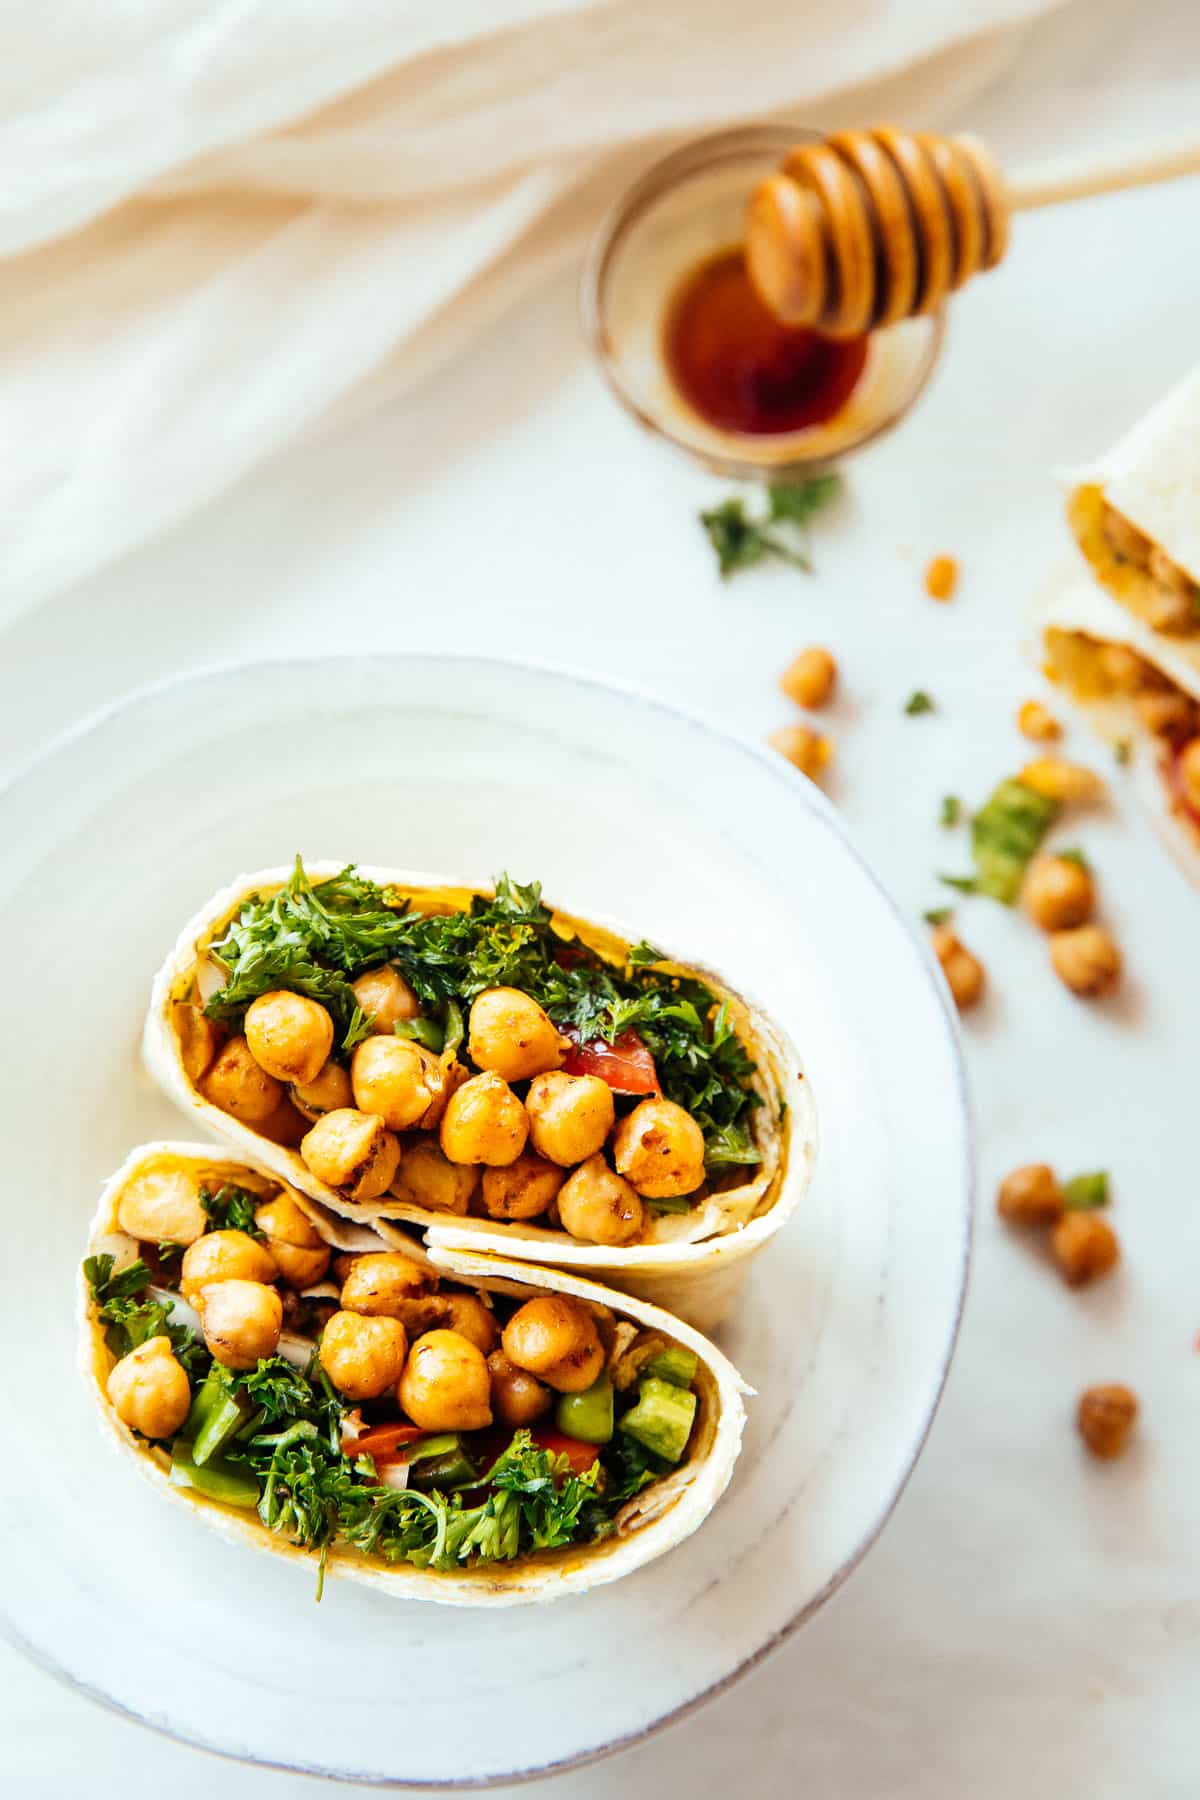 spicy chickpea wraps cut in half